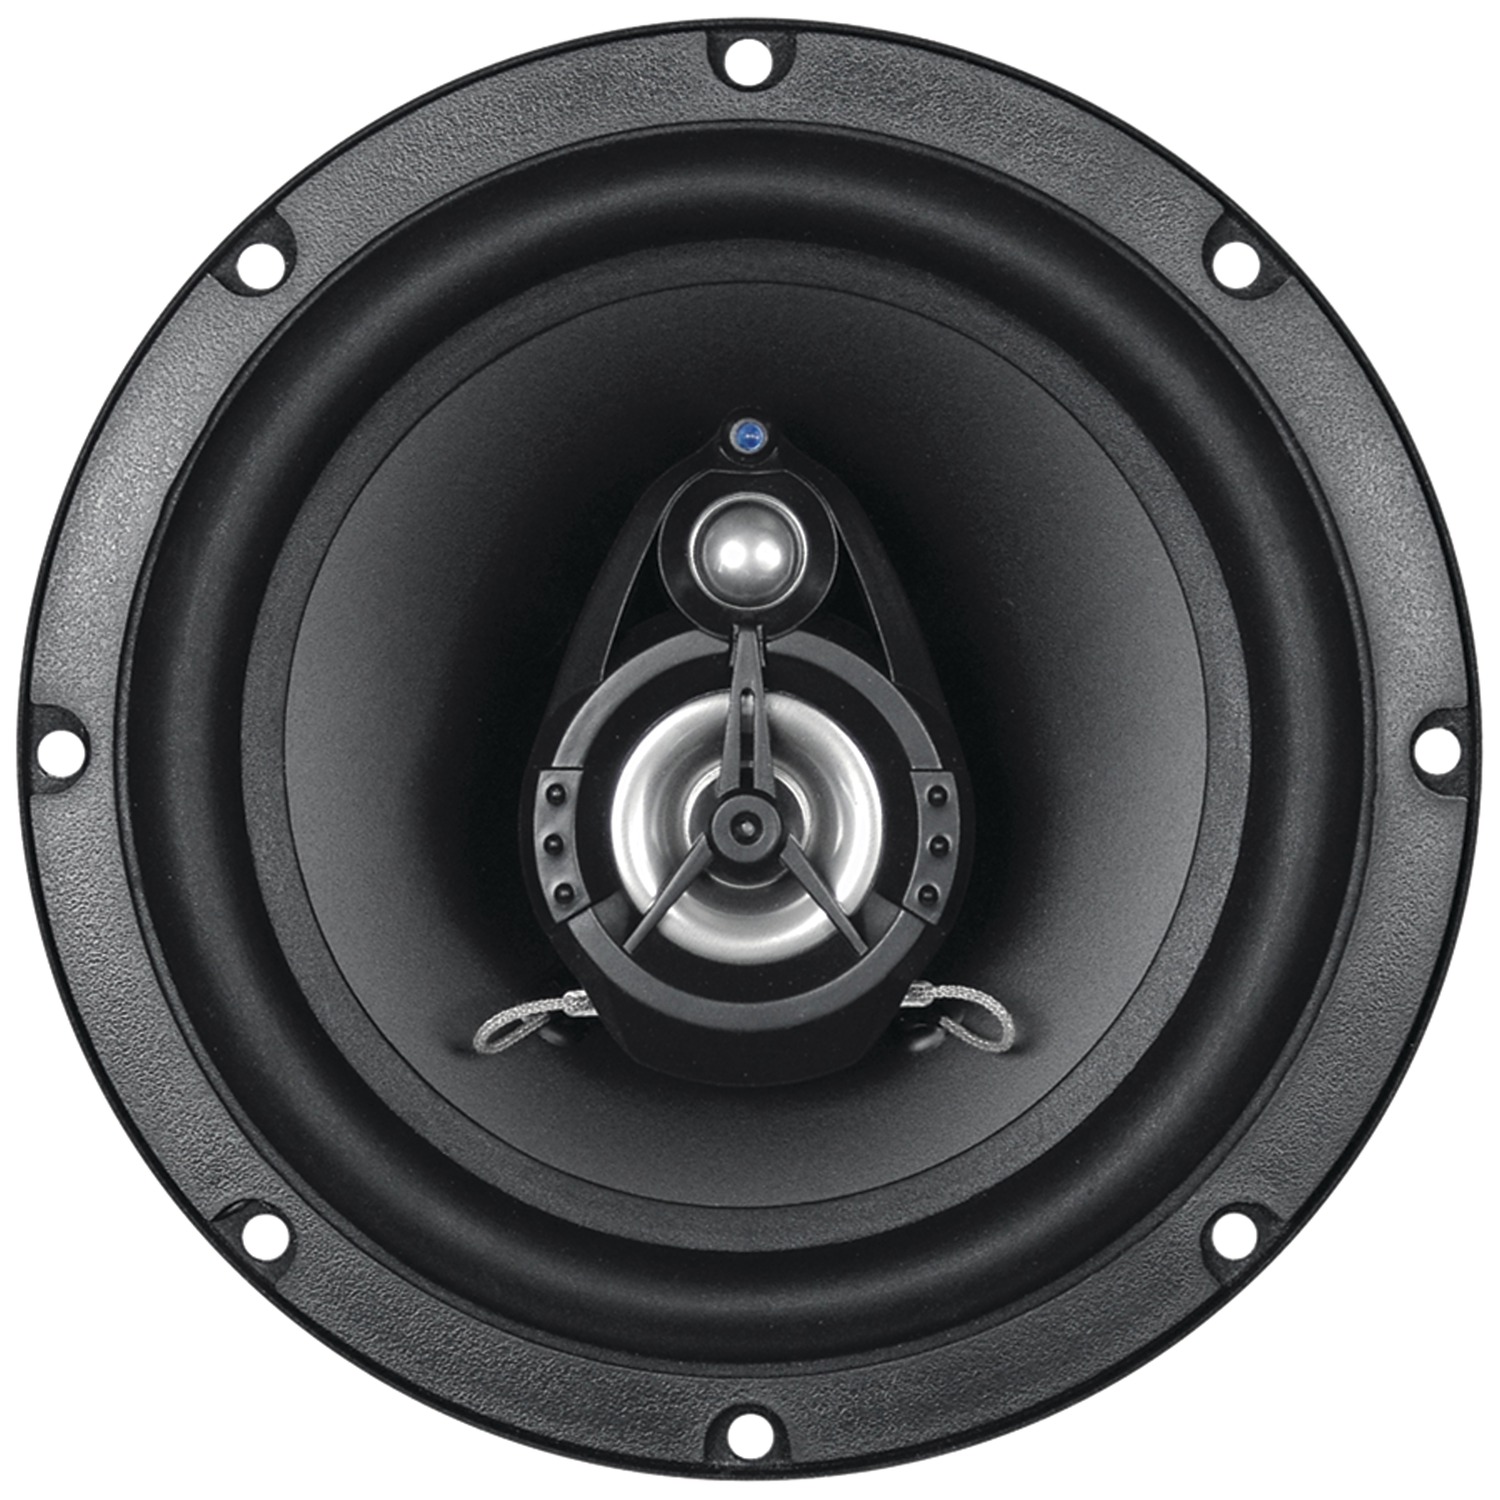 Renegade Rx62 Rx Series Full-range Coaxial Speakers (6.5", 2 Way) - image 2 of 5